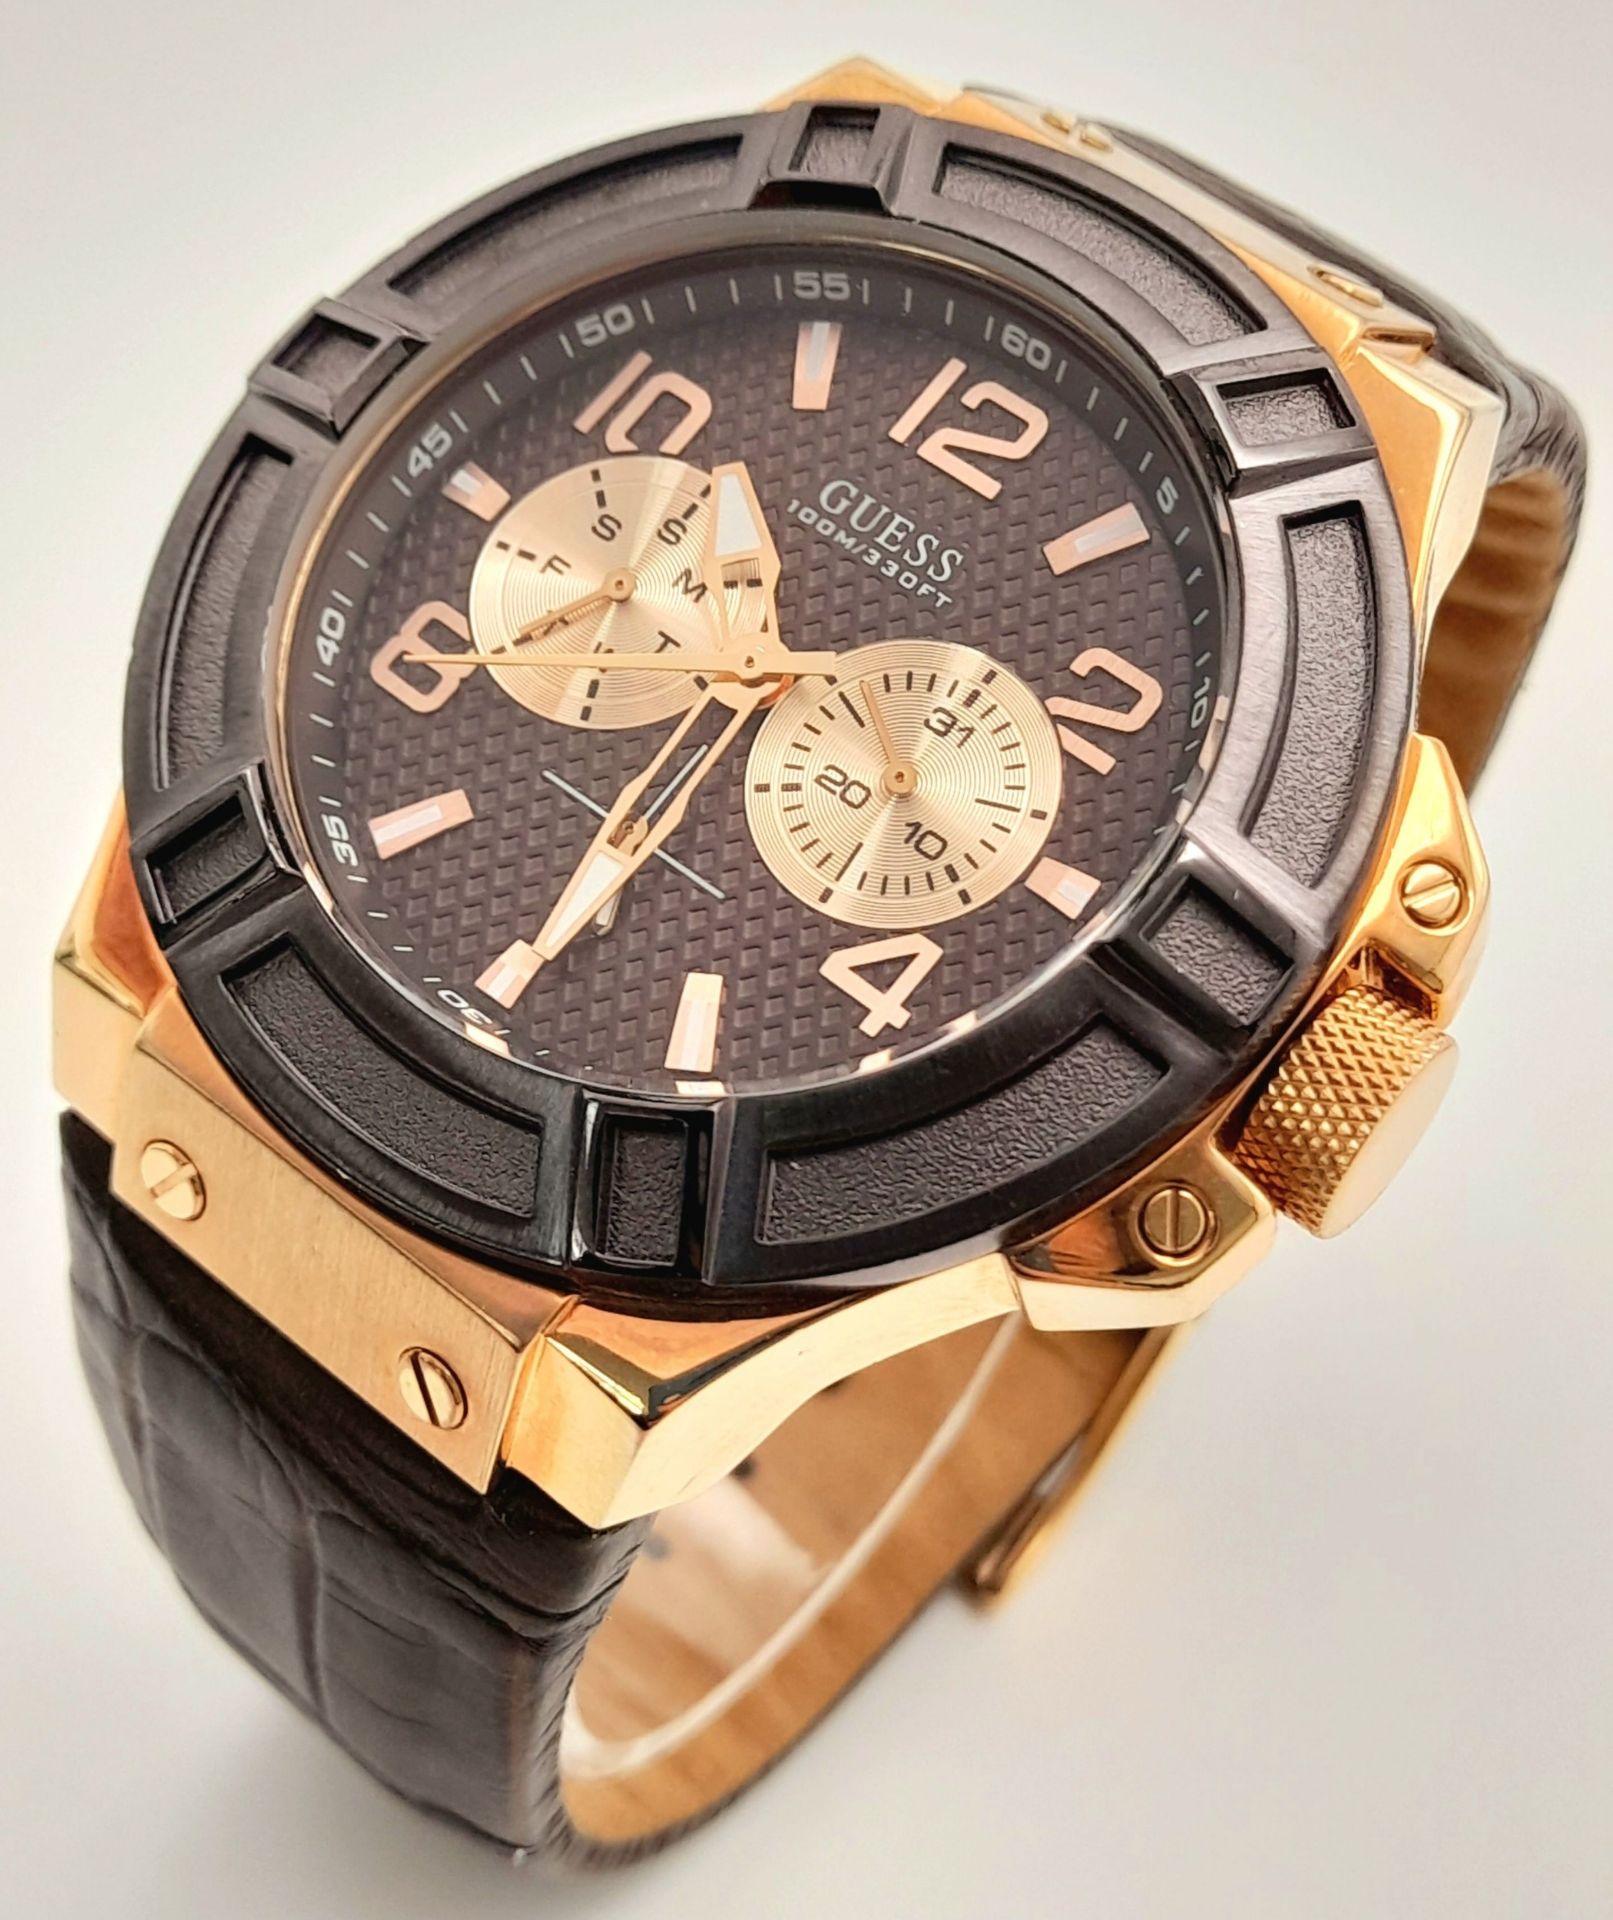 A Men’s Rose Gold-Toned Sports Fashion Watch by Guess (45mm Case). Full Working Order. - Image 6 of 6